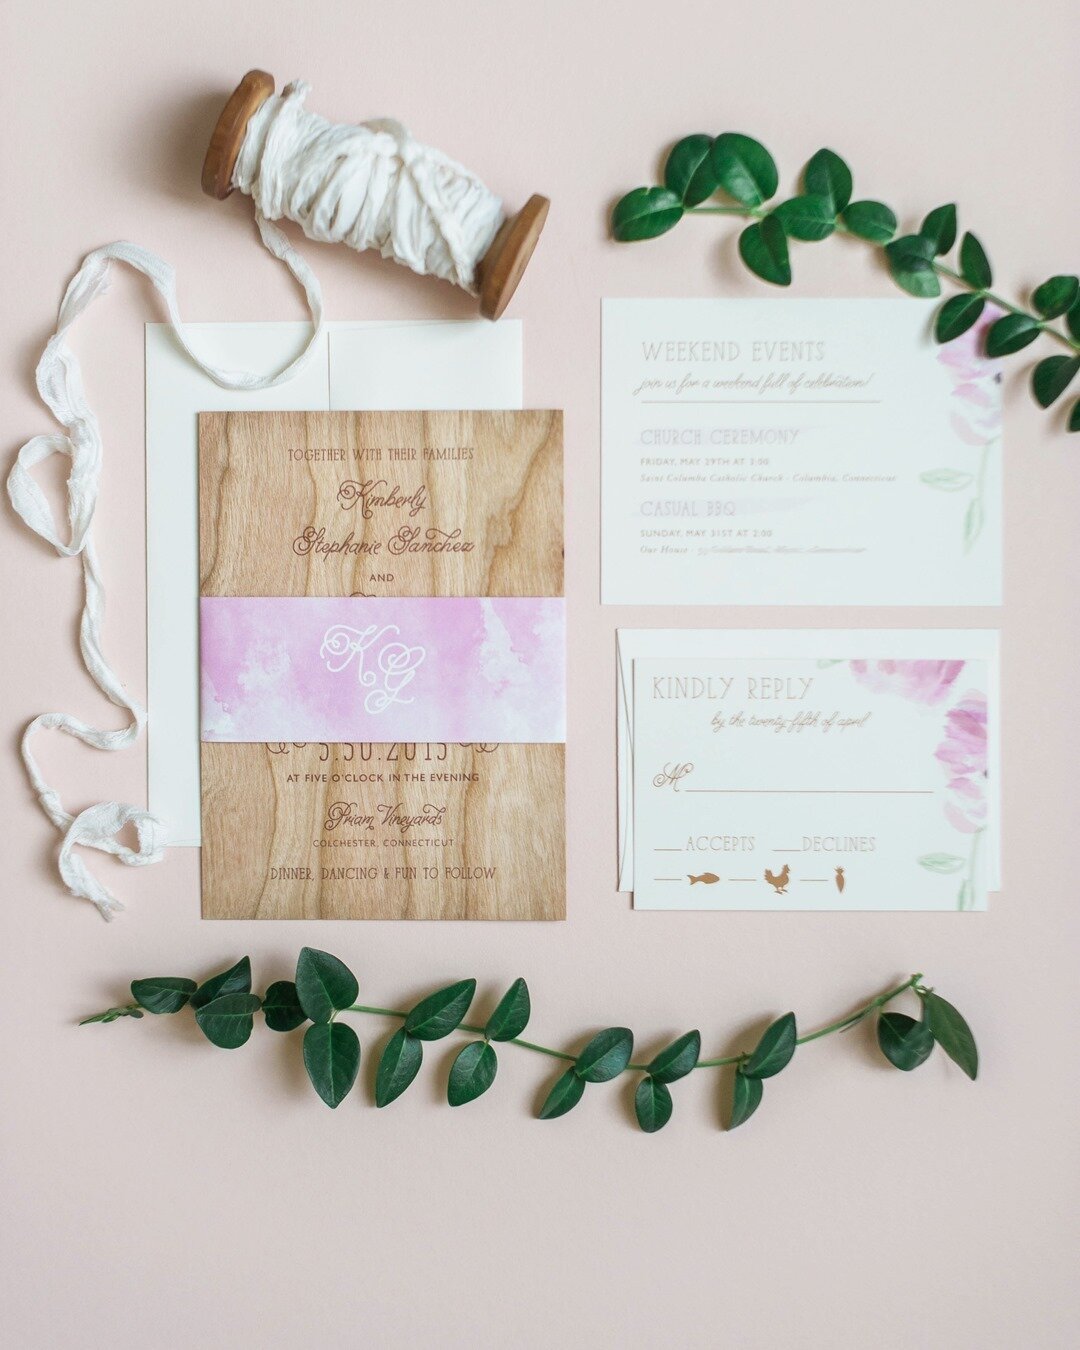 One of my older designs, but it has a special place in my heart. The day this suite was featured on @beautifulpaper blog, one of my biggest business dreams came true! Wood + watercolor are a fabulous pair, don&rsquo;t you think? 💜⠀⠀⠀⠀⠀⠀⠀⠀⠀
photo: @b